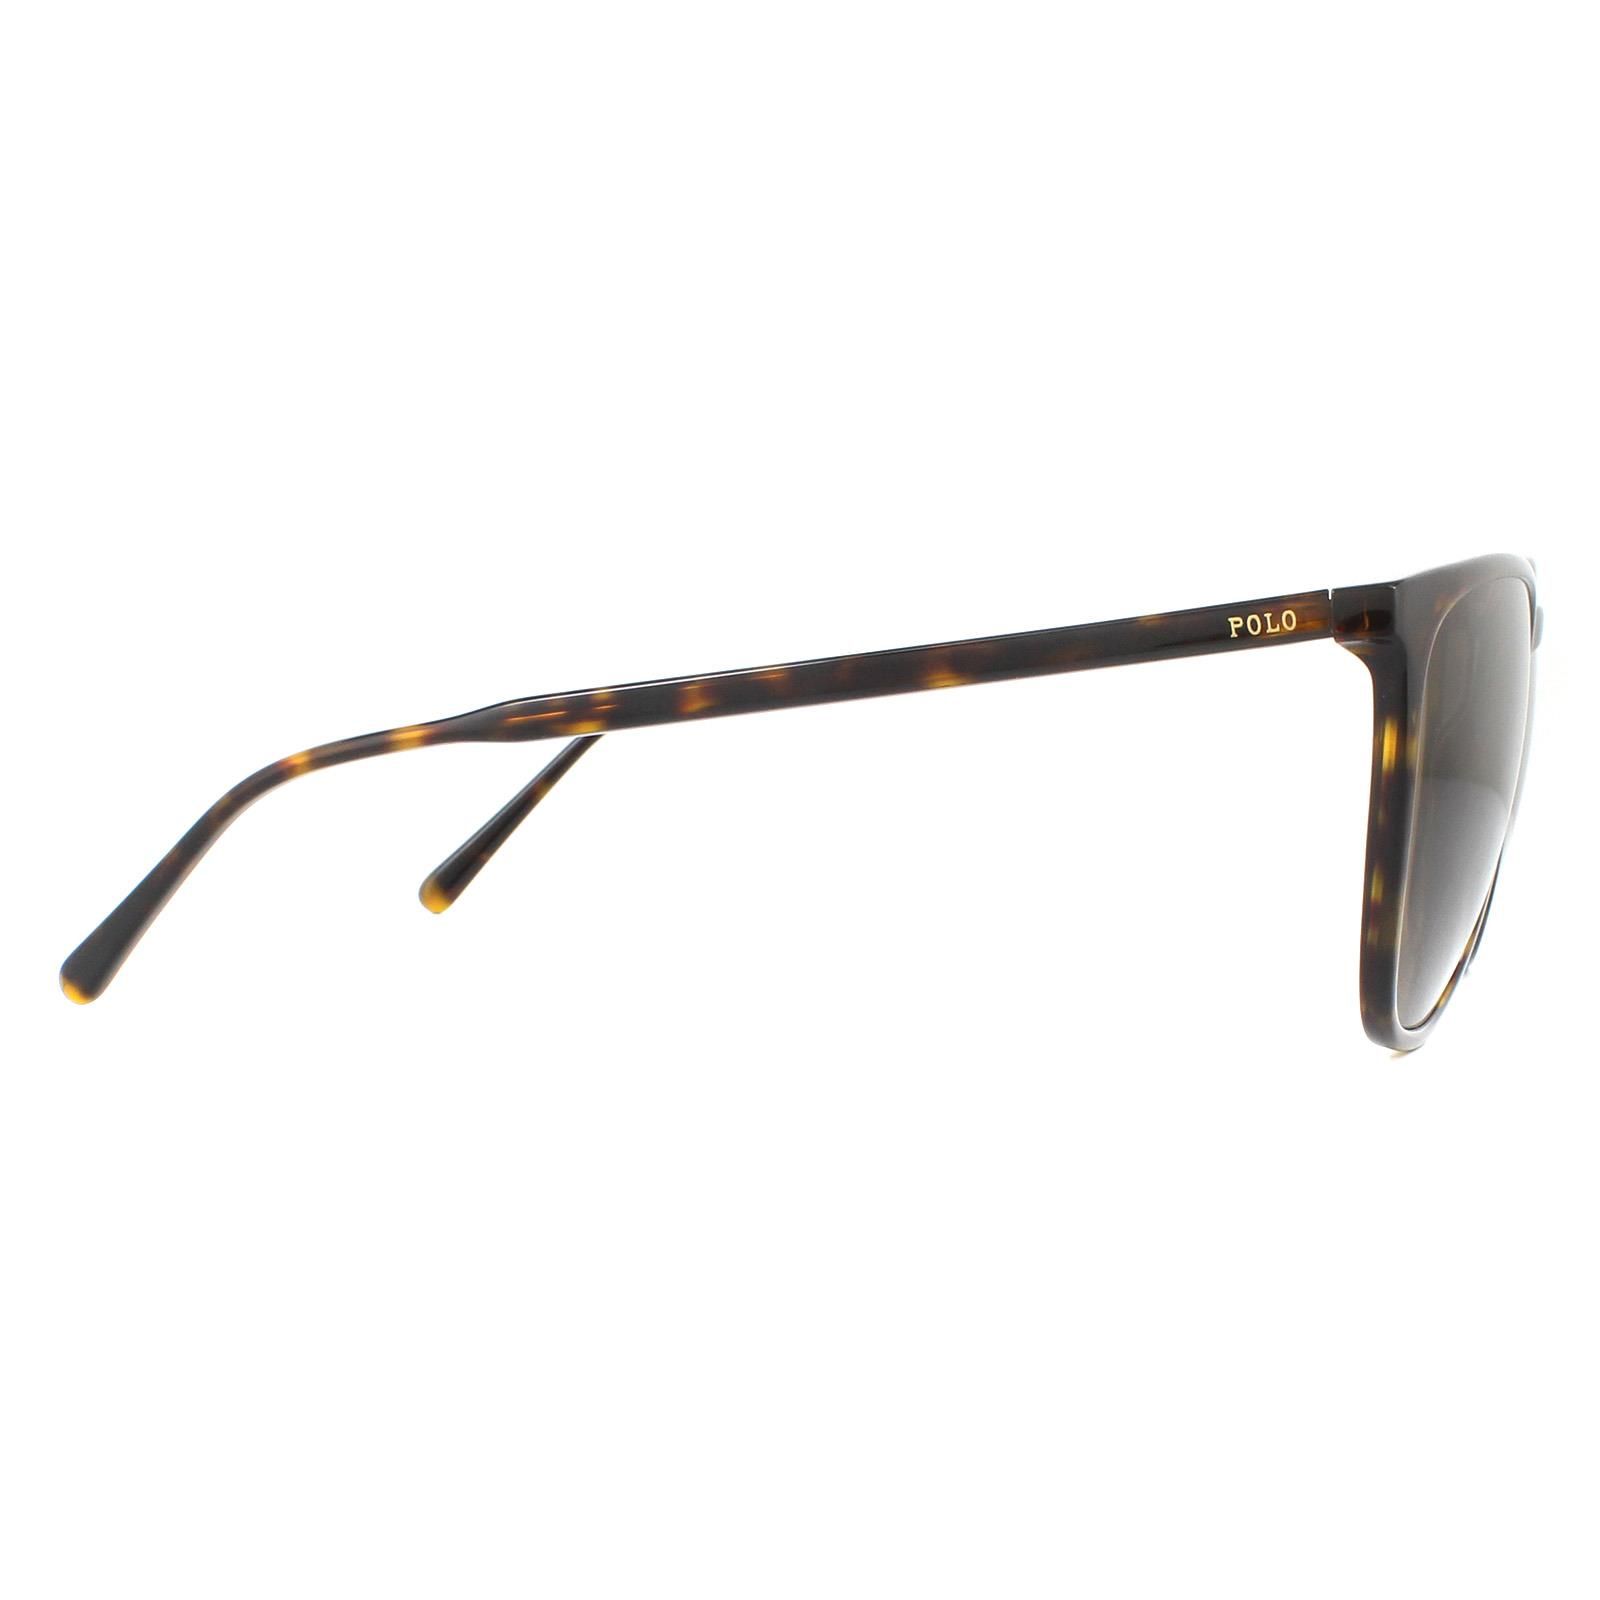 Polo Ralph Lauren Sunglasses PH4141 500373 Shiny Dark Havana Brown are a sleek square style made from lightweight acetate and feature a keyhole bridge and ultra slim temples with the Polo logo.